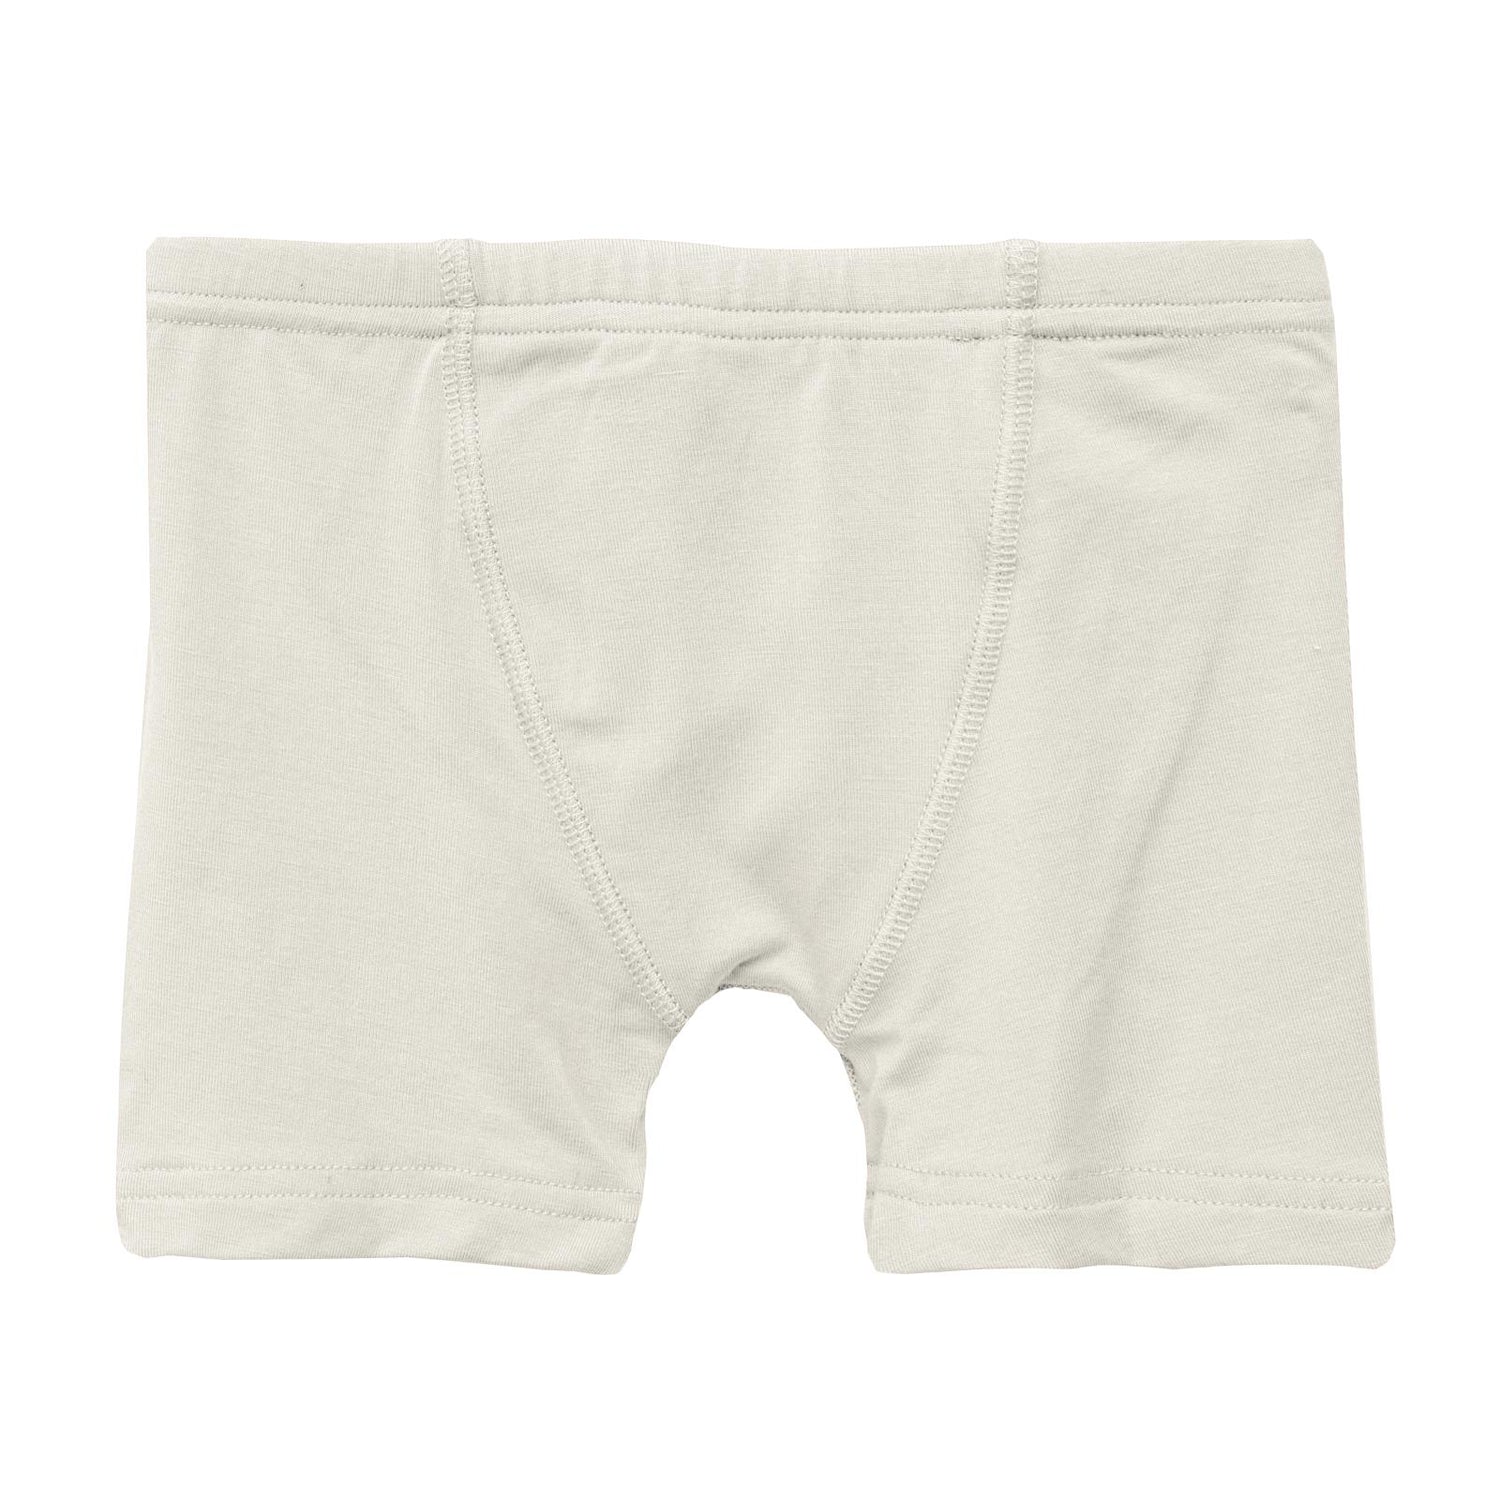 Boxer Brief in Natural